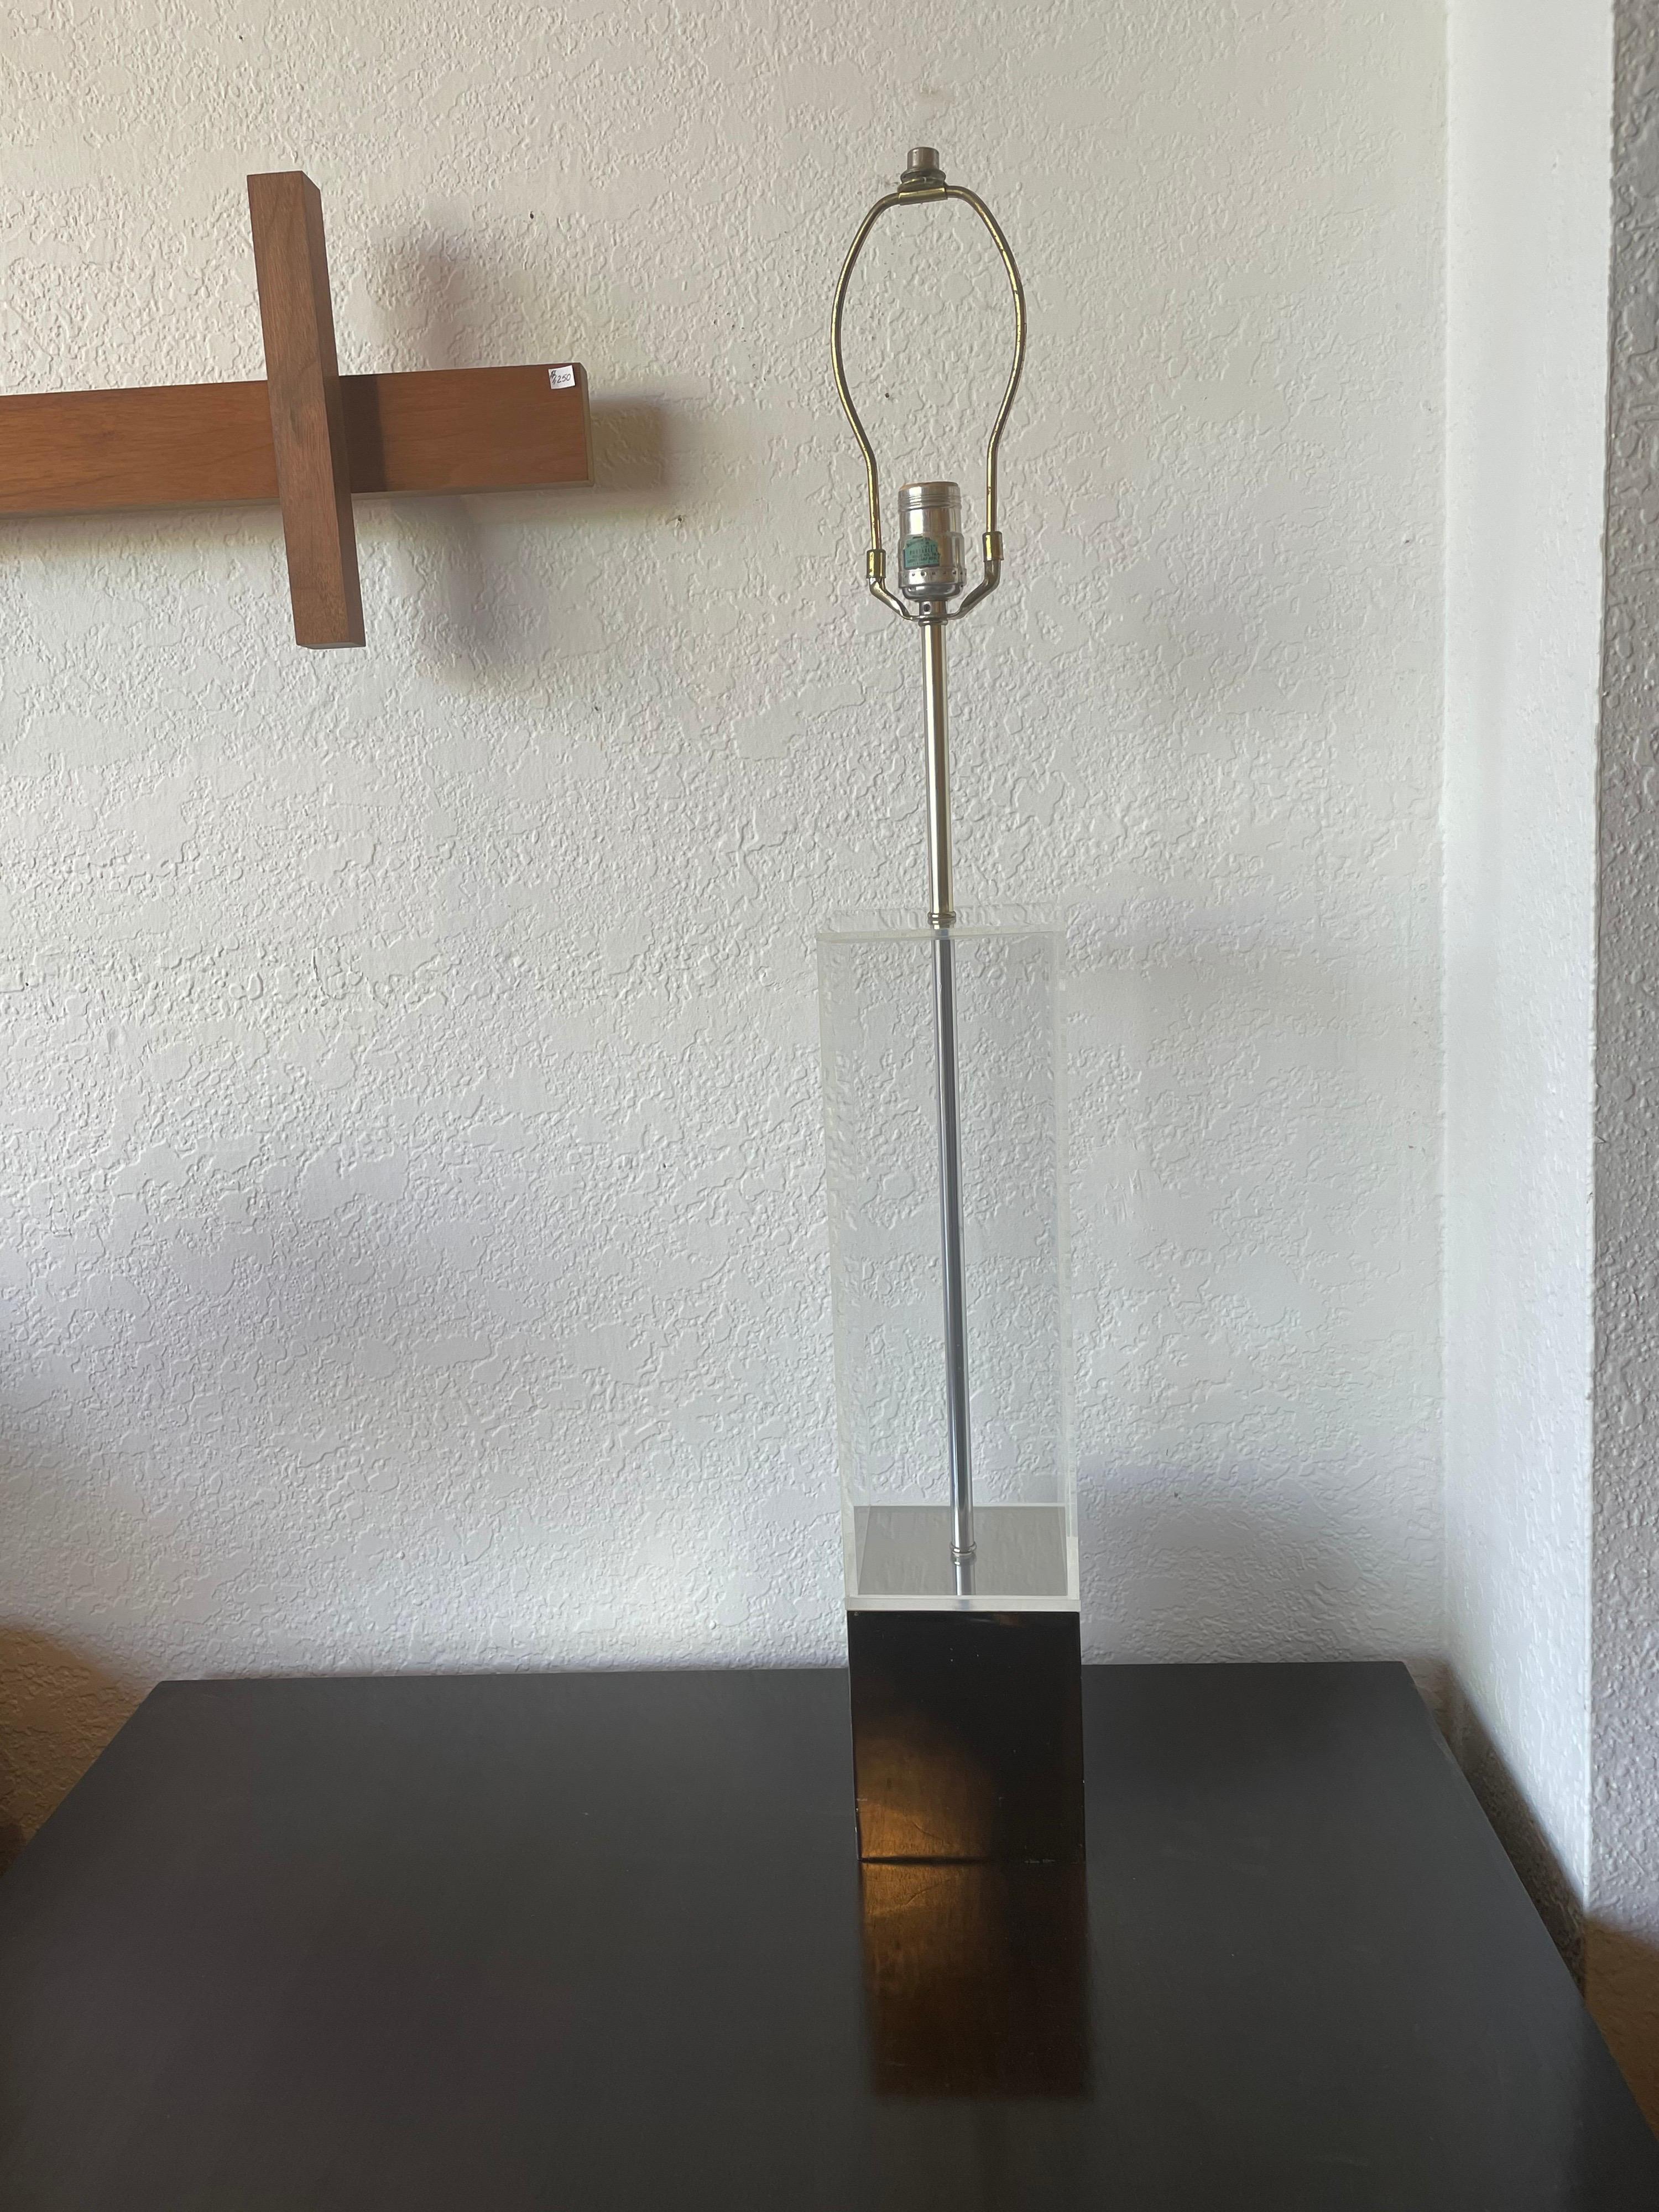 Beautiful simple design tall cube shape lamp by Laurel lighting company, we have polished the base and the top, its in perfect working condition. The lamp is 29